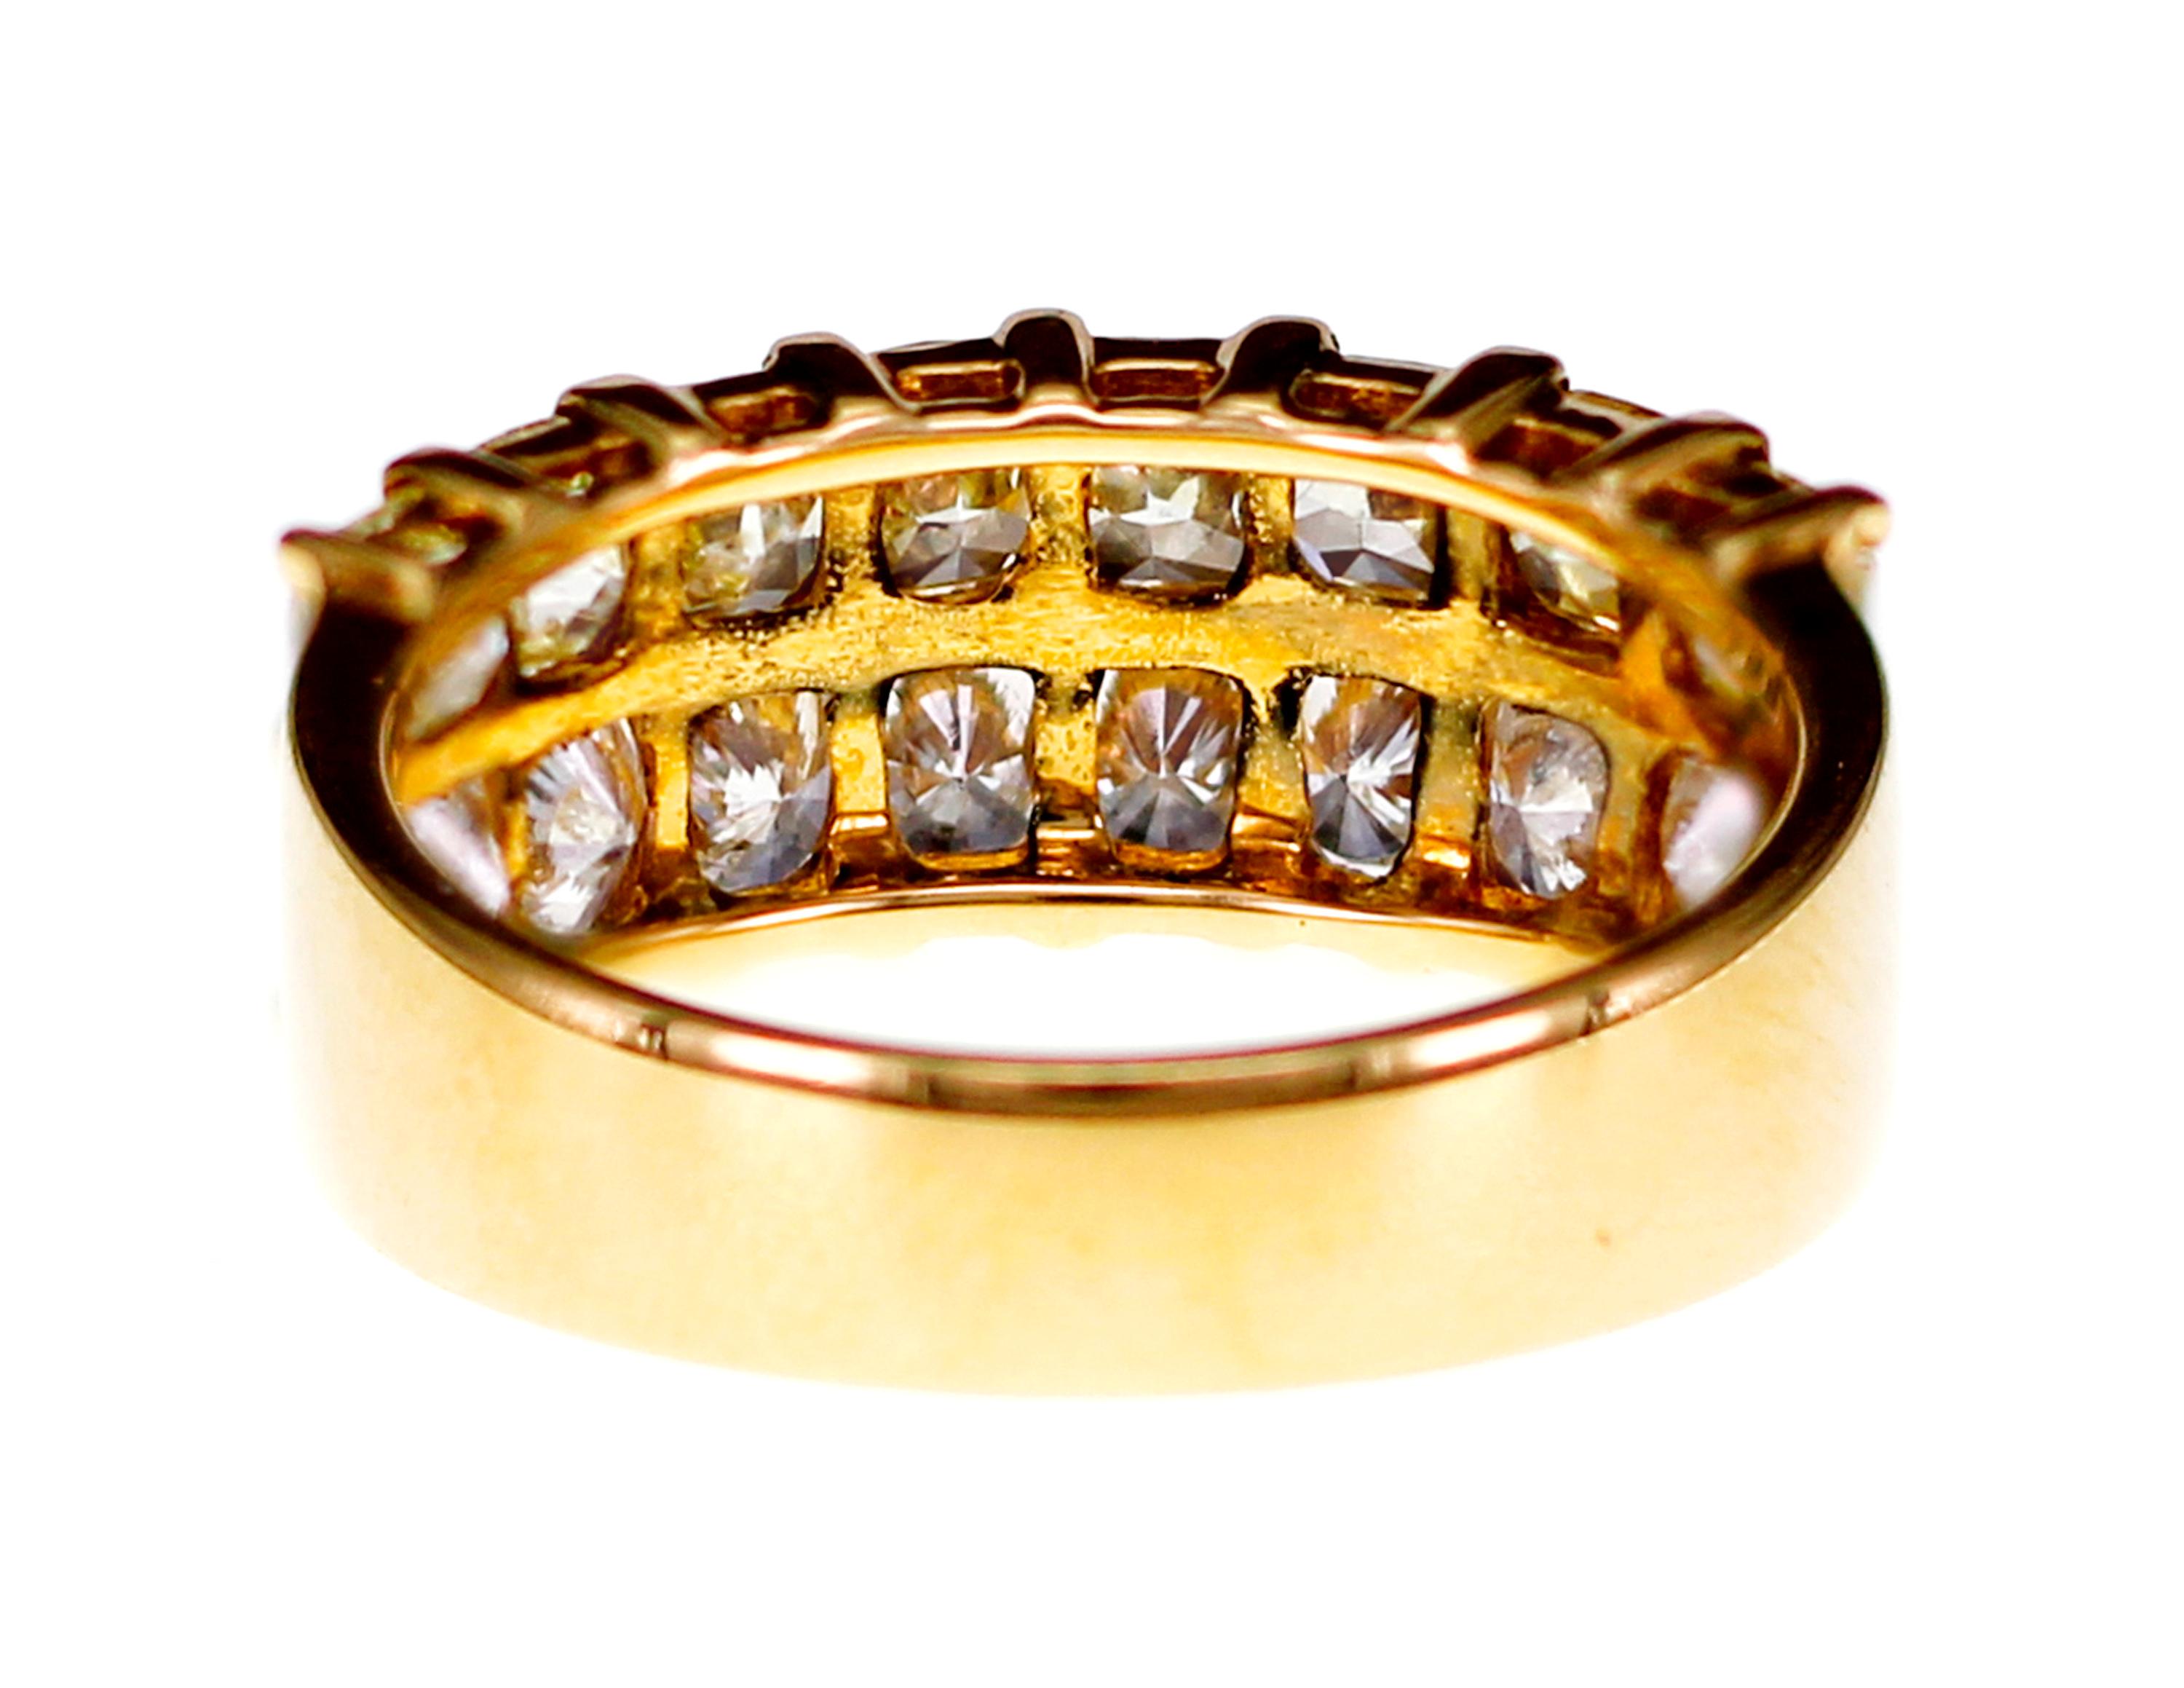 Art Nouveau 1.88 Carat Natural Yellow Diamond with 1.74 Carat White Diamond Band Ring For Sale